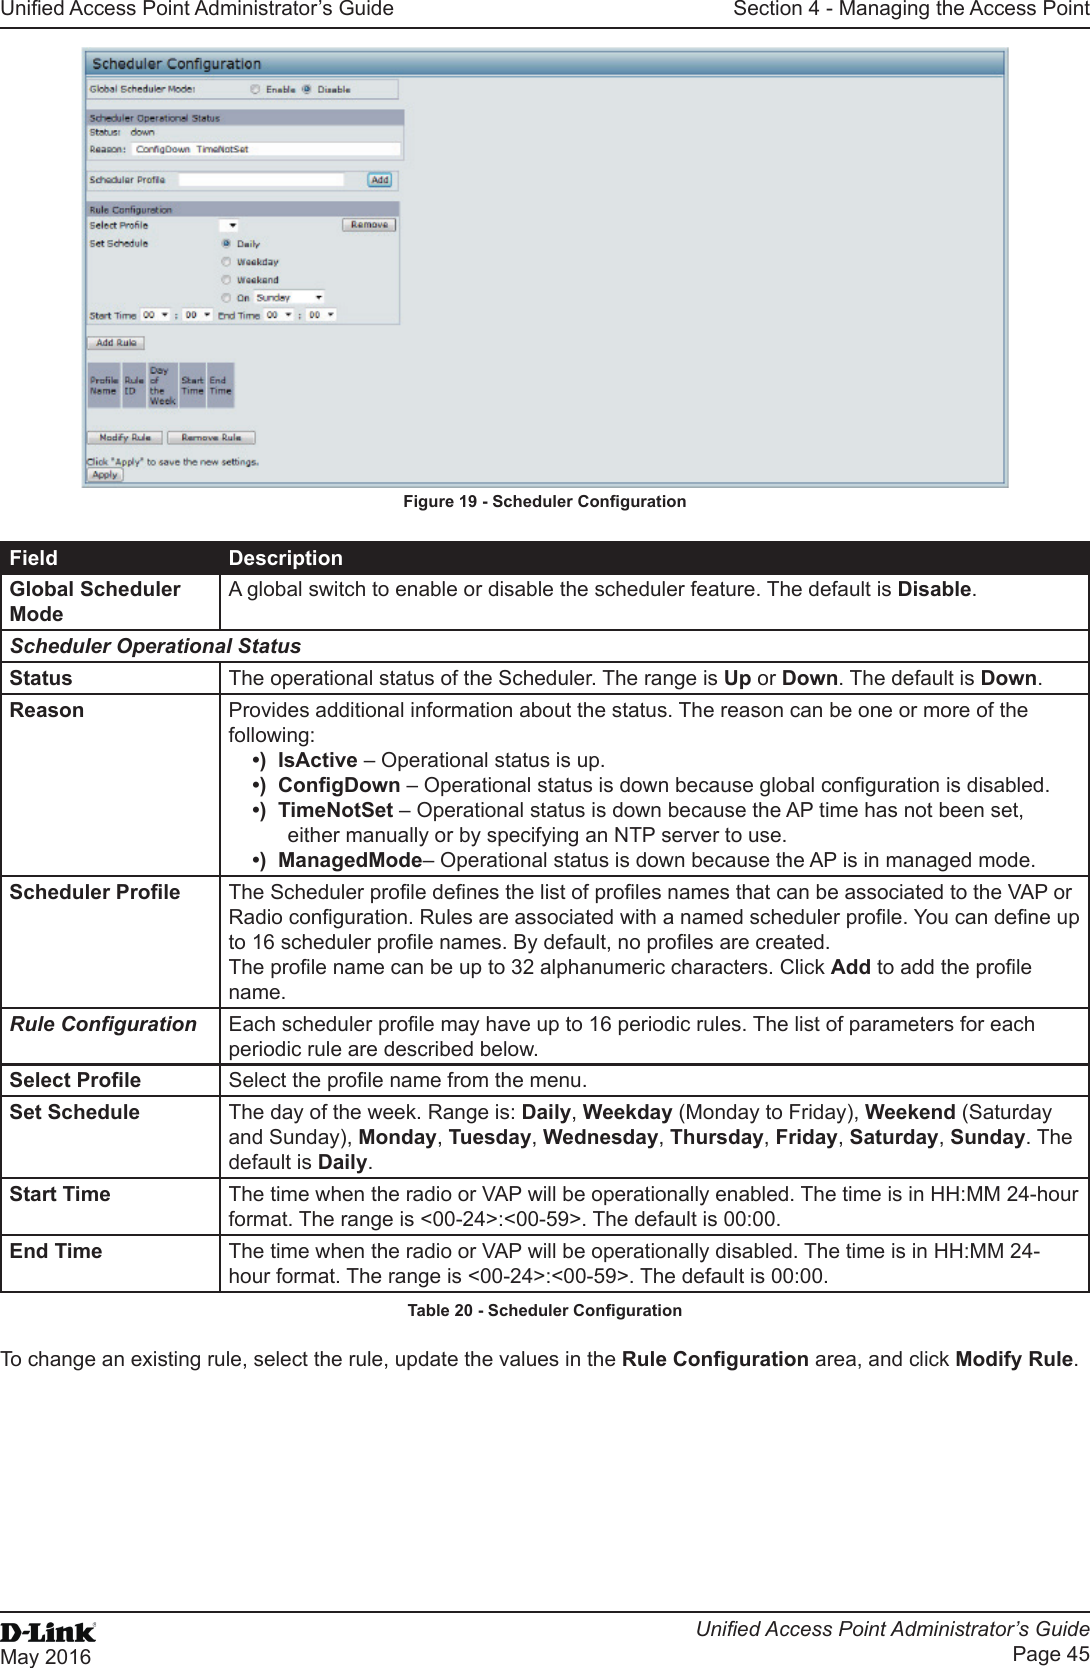 Unied Access Point Administrator’s GuideUnied Access Point Administrator’s GuidePage 45May 2016Section 4 - Managing the Access PointFigure 19 - Scheduler CongurationField DescriptionGlobal Scheduler ModeA global switch to enable or disable the scheduler feature. The default is Disable.Scheduler Operational StatusStatus The operational status of the Scheduler. The range is Up or Down. The default is Down.Reason Provides additional information about the status. The reason can be one or more of the following:•)  IsActive – Operational status is up.•)  CongDown – Operational status is down because global conguration is disabled.•)  TimeNotSet – Operational status is down because the AP time has not been set, either manually or by specifying an NTP server to use.•)  ManagedMode– Operational status is down because the AP is in managed mode.Scheduler Prole The Scheduler prole denes the list of proles names that can be associated to the VAP or Radio conguration. Rules are associated with a named scheduler prole. You can dene up to 16 scheduler prole names. By default, no proles are created.The prole name can be up to 32 alphanumeric characters. Click Add to add the prole name.Rule Conguration Each scheduler prole may have up to 16 periodic rules. The list of parameters for each periodic rule are described below.Select Prole Select the prole name from the menu.Set Schedule The day of the week. Range is: Daily, Weekday (Monday to Friday), Weekend (Saturday and Sunday), Monday, Tuesday, Wednesday, Thursday, Friday, Saturday, Sunday. The default is Daily.Start Time The time when the radio or VAP will be operationally enabled. The time is in HH:MM 24-hour format. The range is &lt;00-24&gt;:&lt;00-59&gt;. The default is 00:00.End Time The time when the radio or VAP will be operationally disabled. The time is in HH:MM 24-hour format. The range is &lt;00-24&gt;:&lt;00-59&gt;. The default is 00:00.Table 20 - Scheduler CongurationTo change an existing rule, select the rule, update the values in the Rule Conguration area, and click Modify Rule.